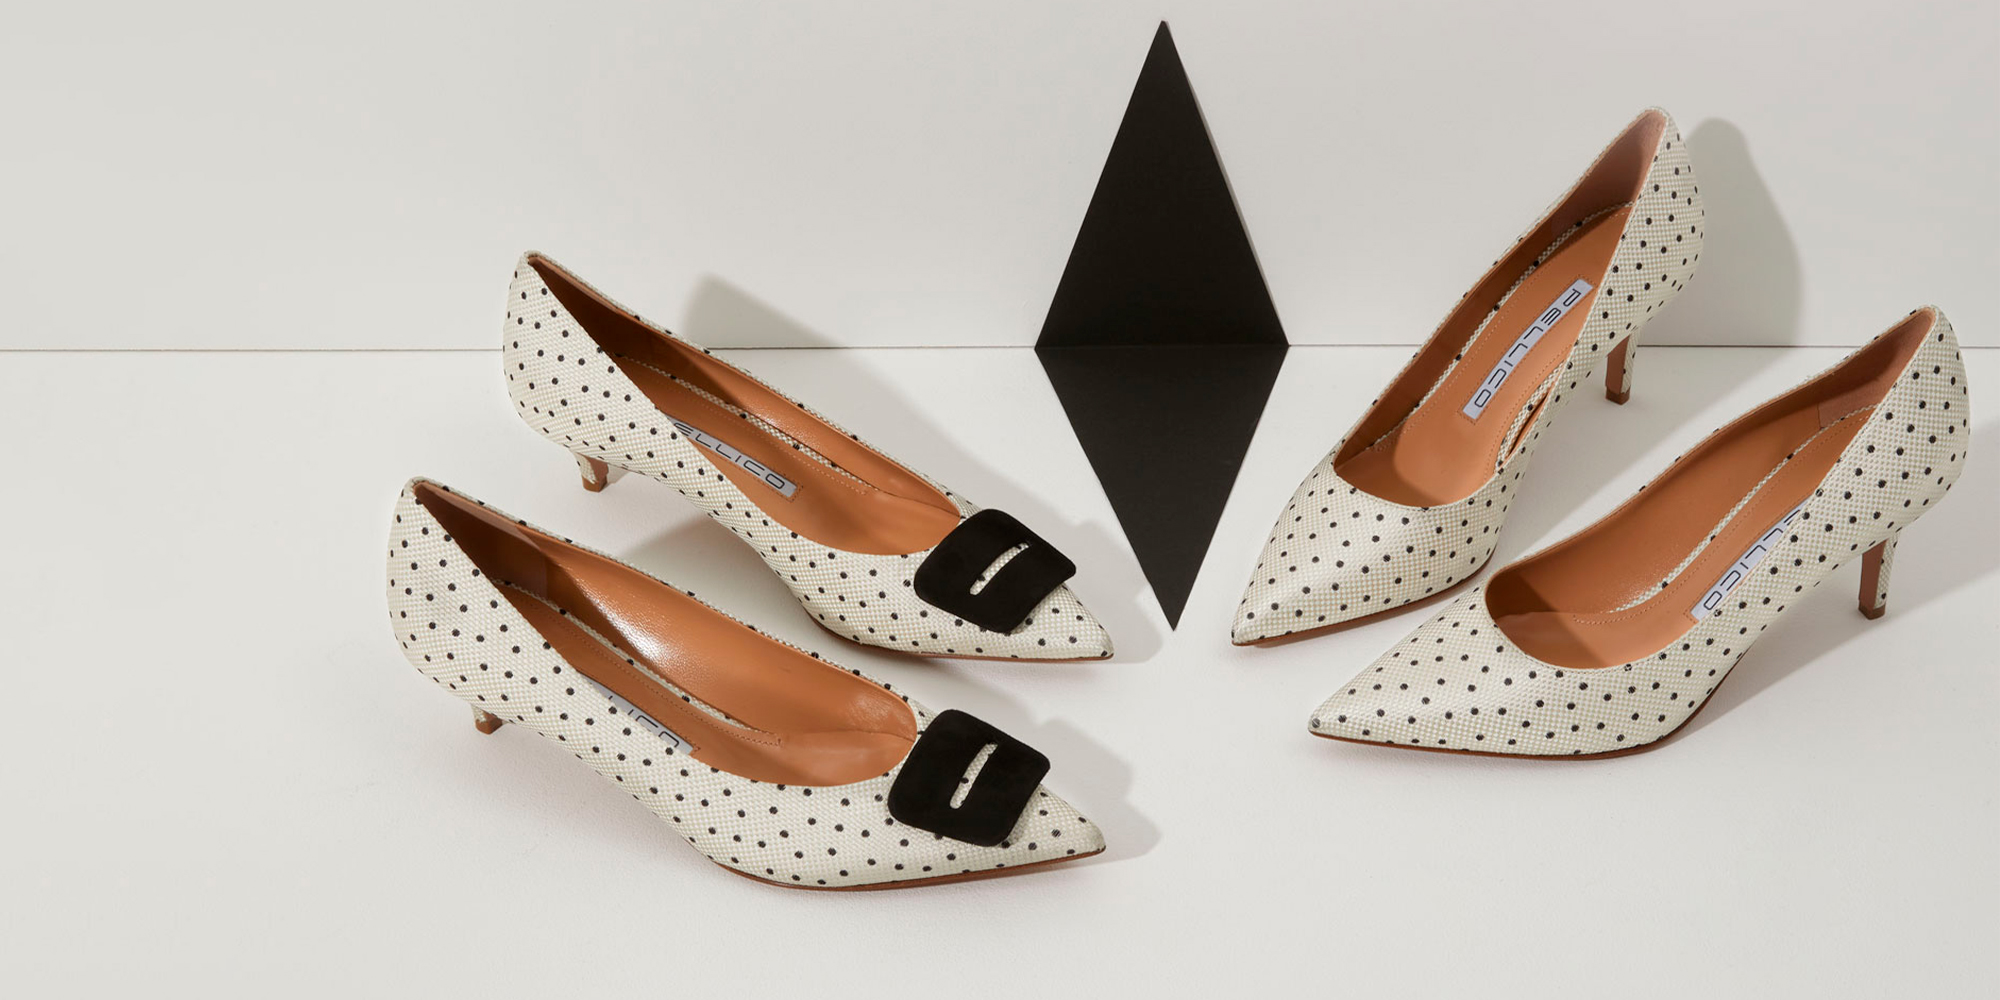 Reminiscent Of The 30's, Polka Dot Patterned Pumps | PELLICO｜ペリーコ